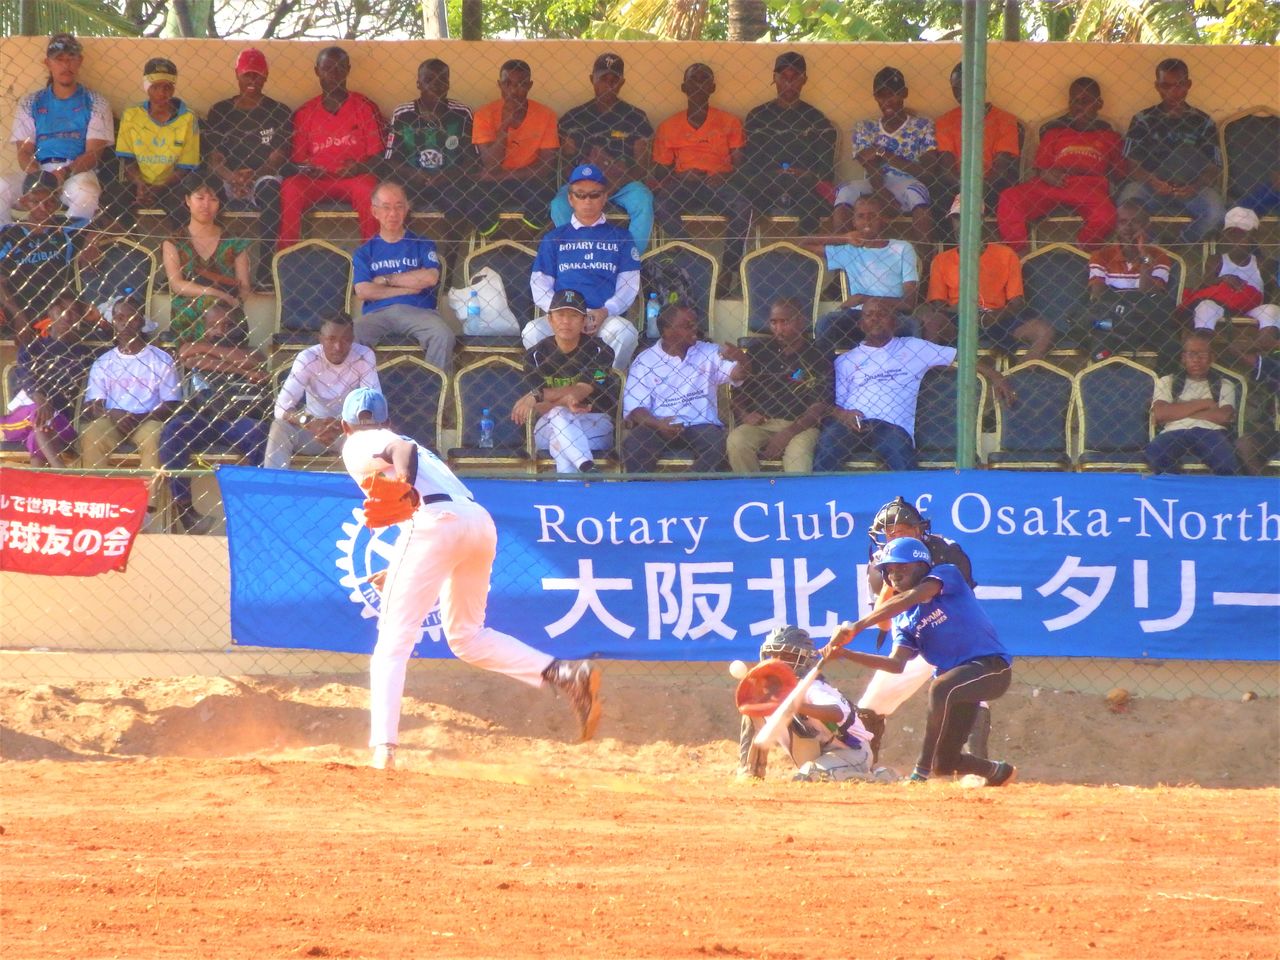 A national tournament staged in Tanzania. Whether pitching or batting, in typical African fashion, the players are unconventional. (© Tomonari Shin’ya)